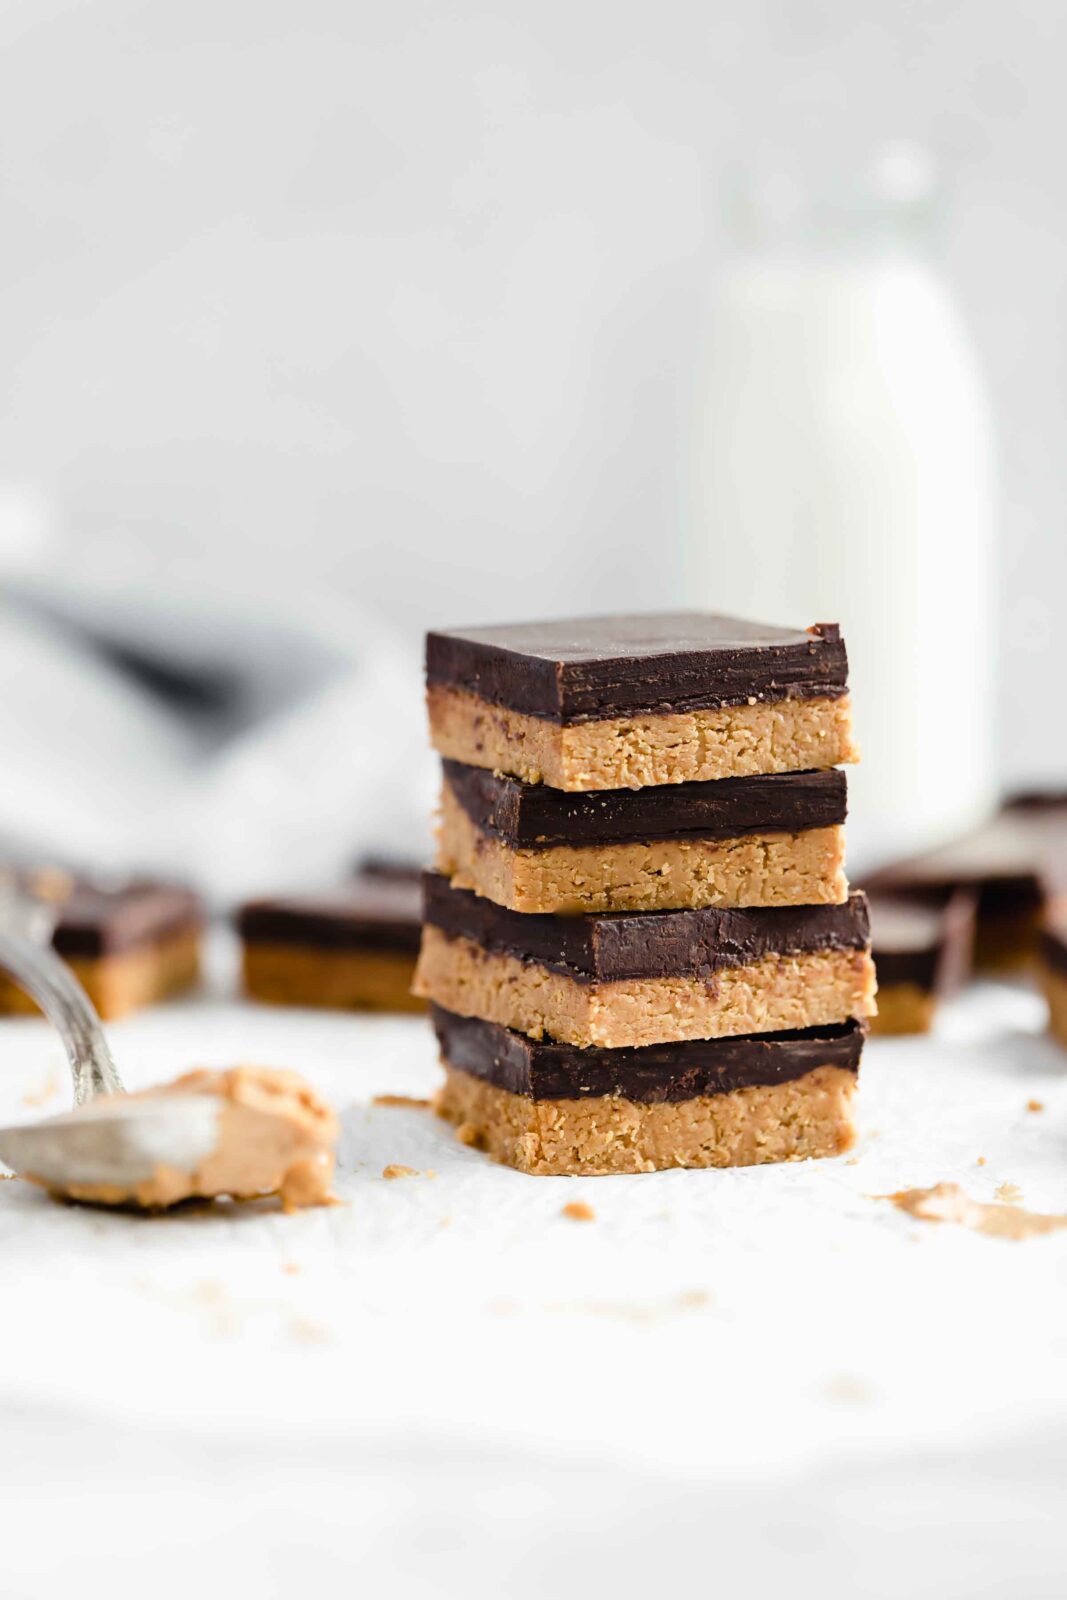 No bake healthy peanut butter chocolate bars made with just 4 ingredients! Vegan, gluten-free, and made with maple syrup, flax seed meal, & dark chocolate!